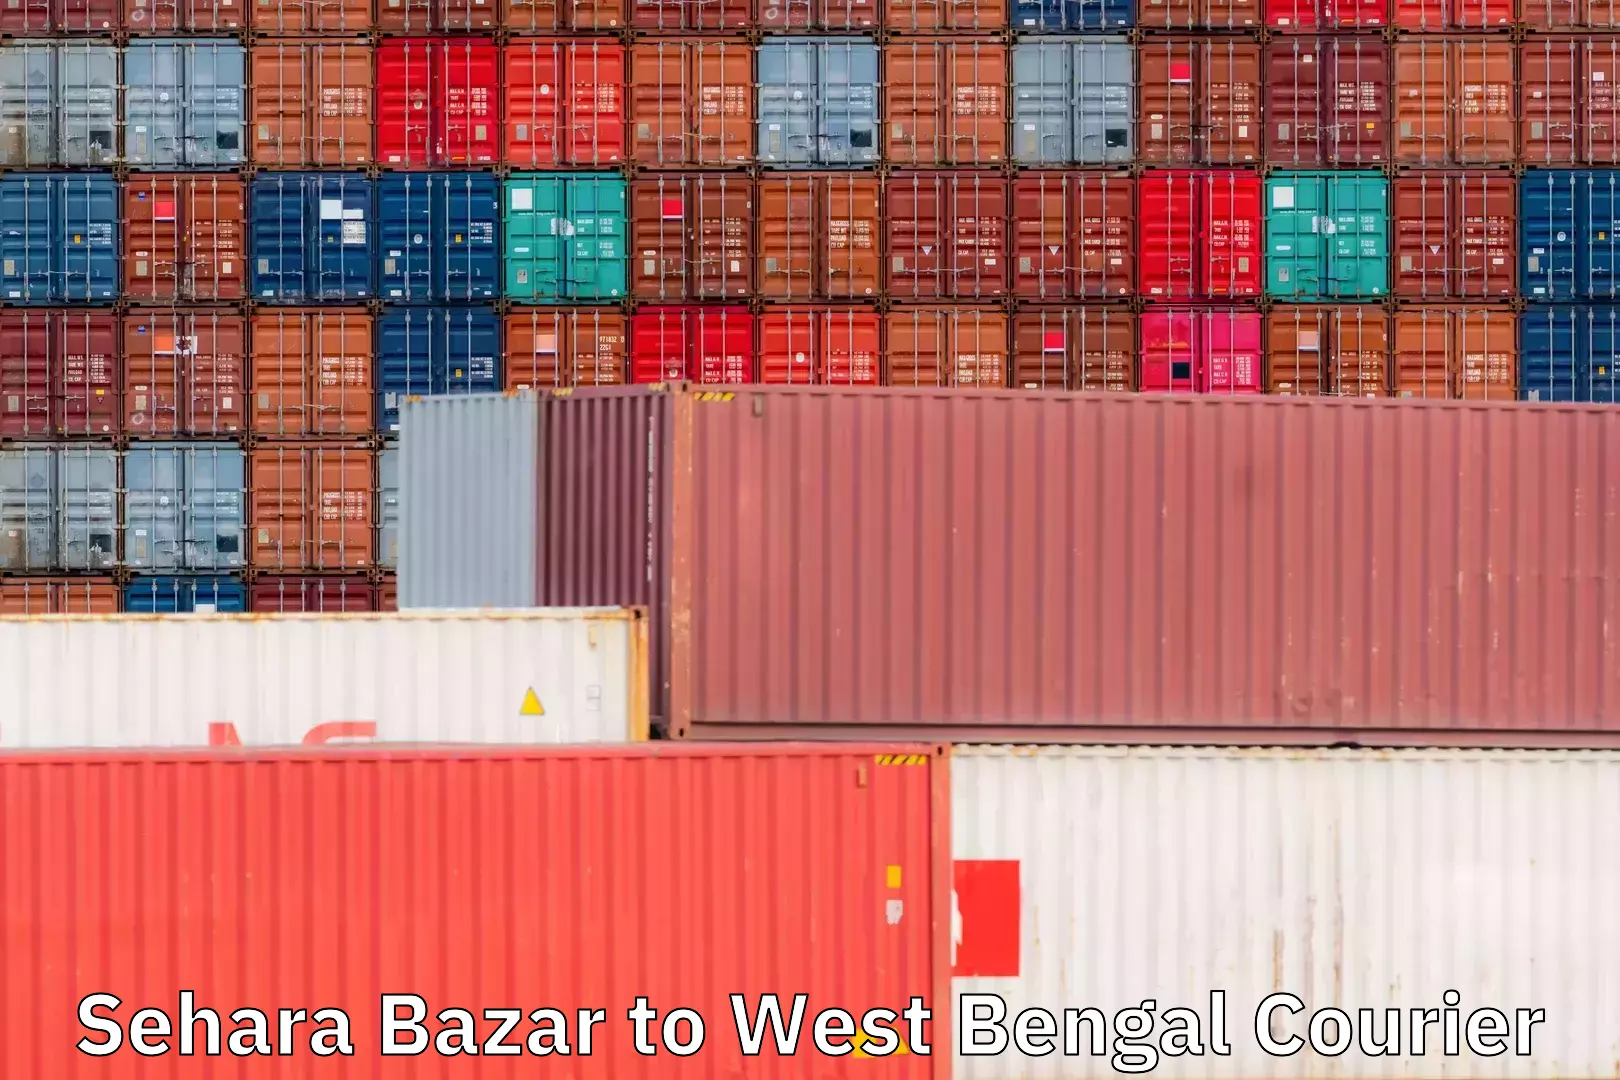 Cargo delivery service in Sehara Bazar to West Bengal